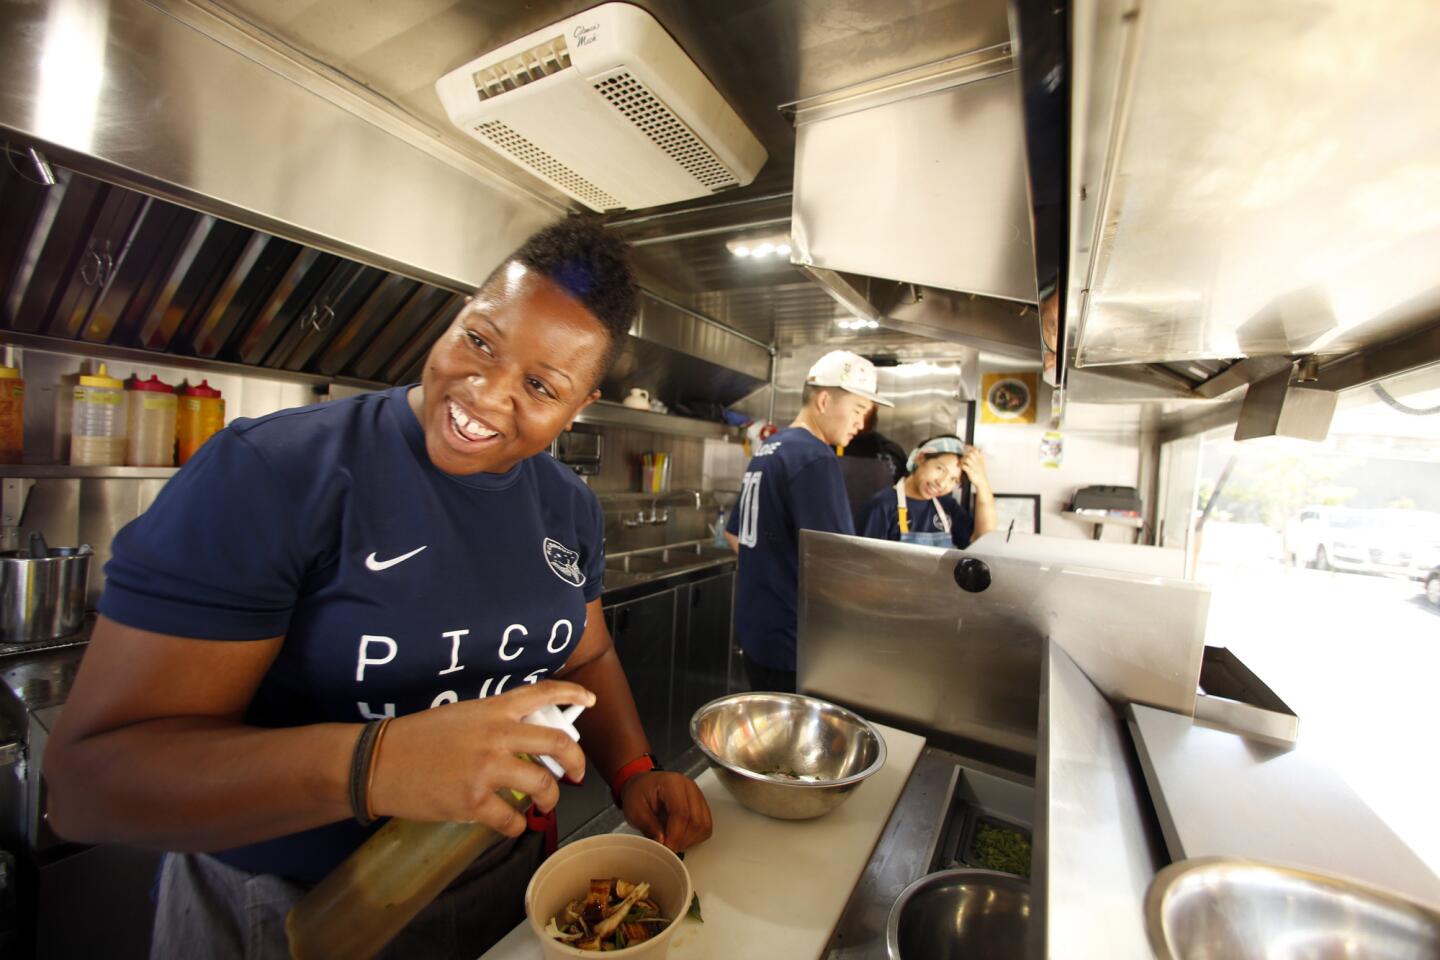 Four chefs offer grain bowls and an 'ugly fruit drank' at Pico House food truck